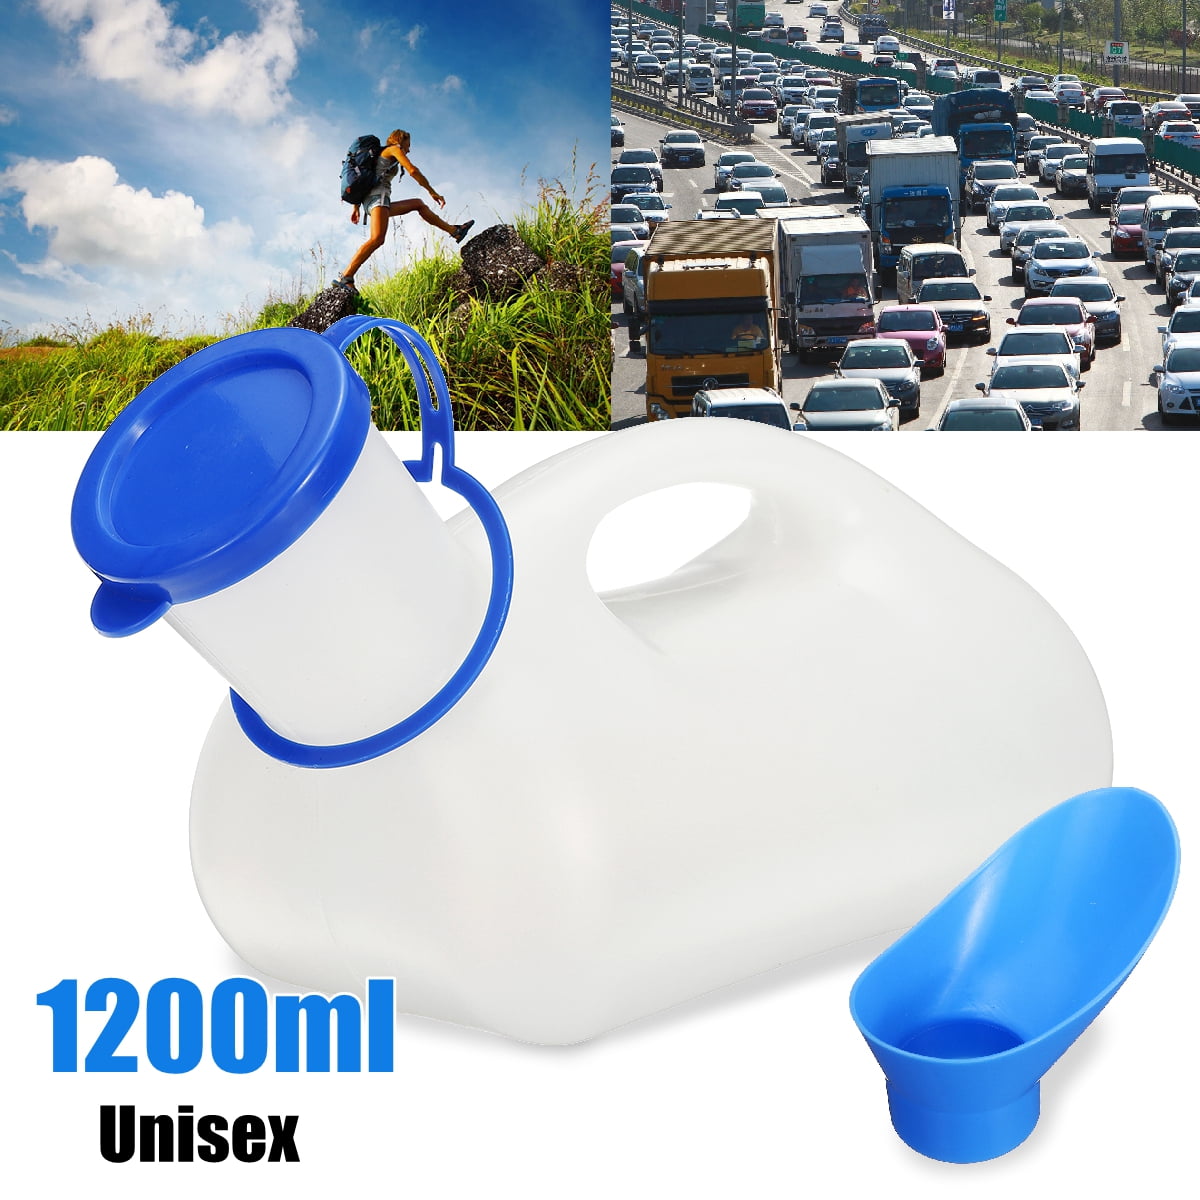 Traveling & Roadtripping Boating WYFDM Outdoor toilet Emergency adult car toilet Folding mobile portable urine bag Self-driving car equipment travel for Camping 